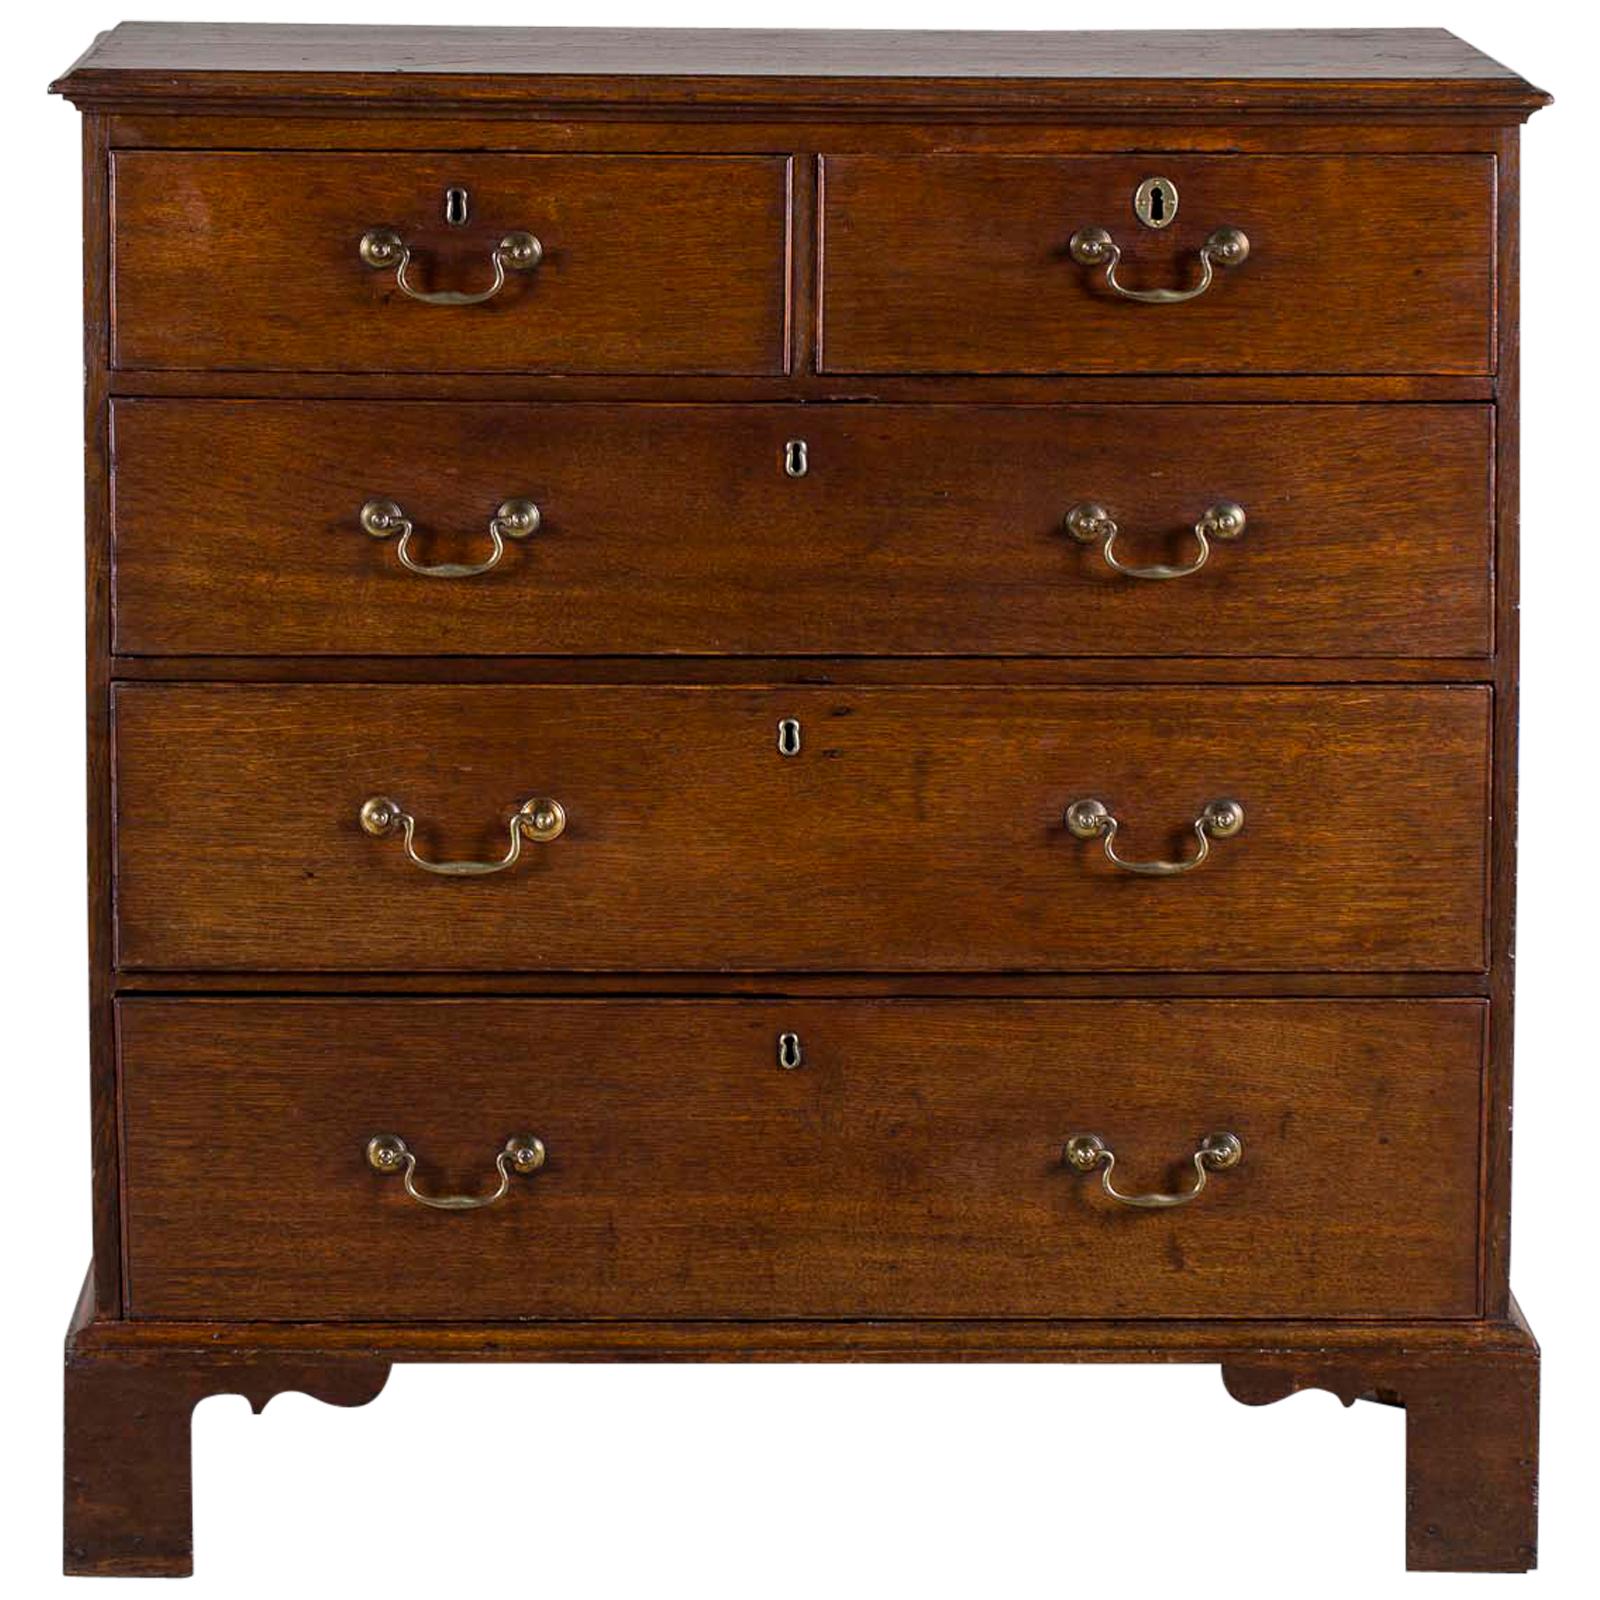 Antique English George III Oak Chest of Drawers, England, circa 1830